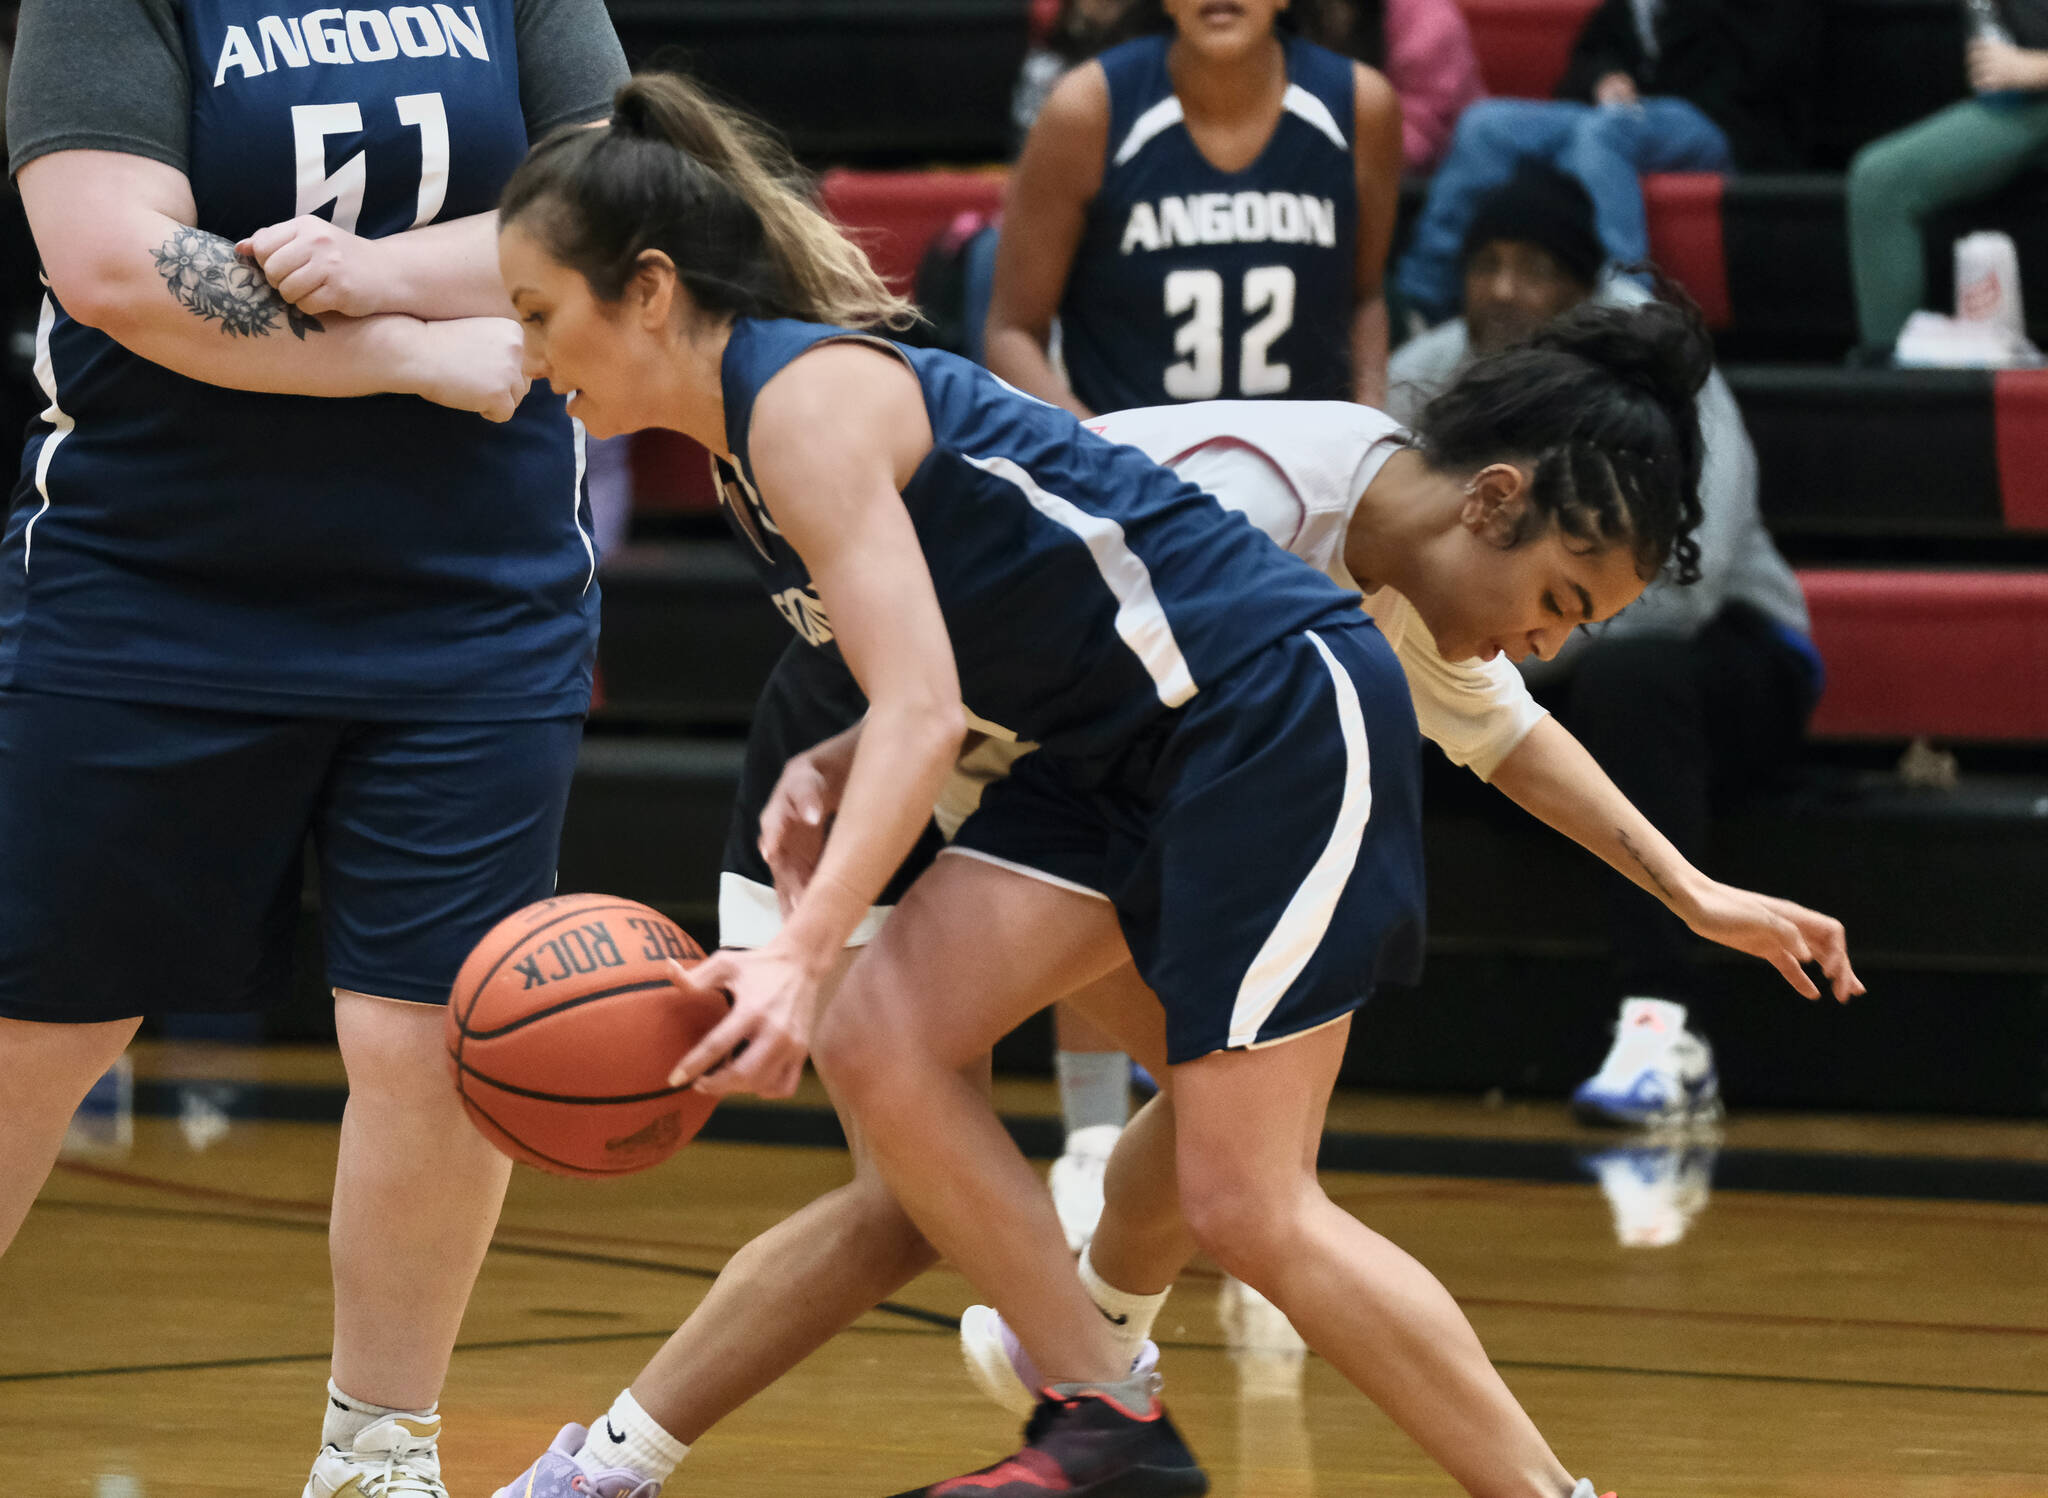 Angoon’s Carmeleeda Estrada is pressured by Kake’s Willow Jackson during Thursday action at the Juneau Lions Club 74th Annual Gold Medal Basketball Tournament at Juneau-Douglas High School: Yadaa.at Kalé. (Klas Stolpe/For the Juneau Empire)